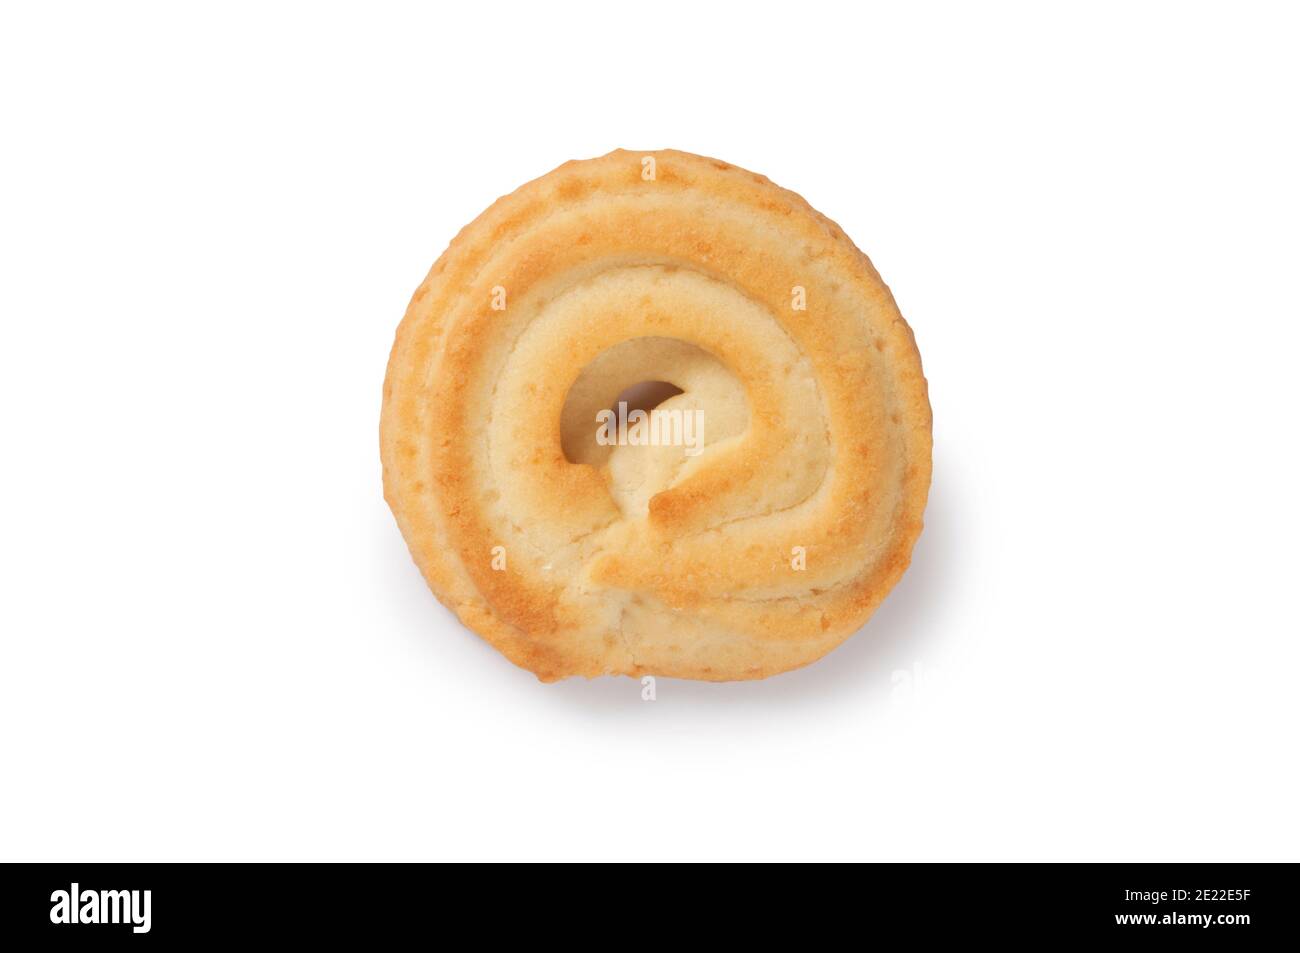 Studio shot of a shortbread biscuit cut out against a white background - John Gollop Stock Photo